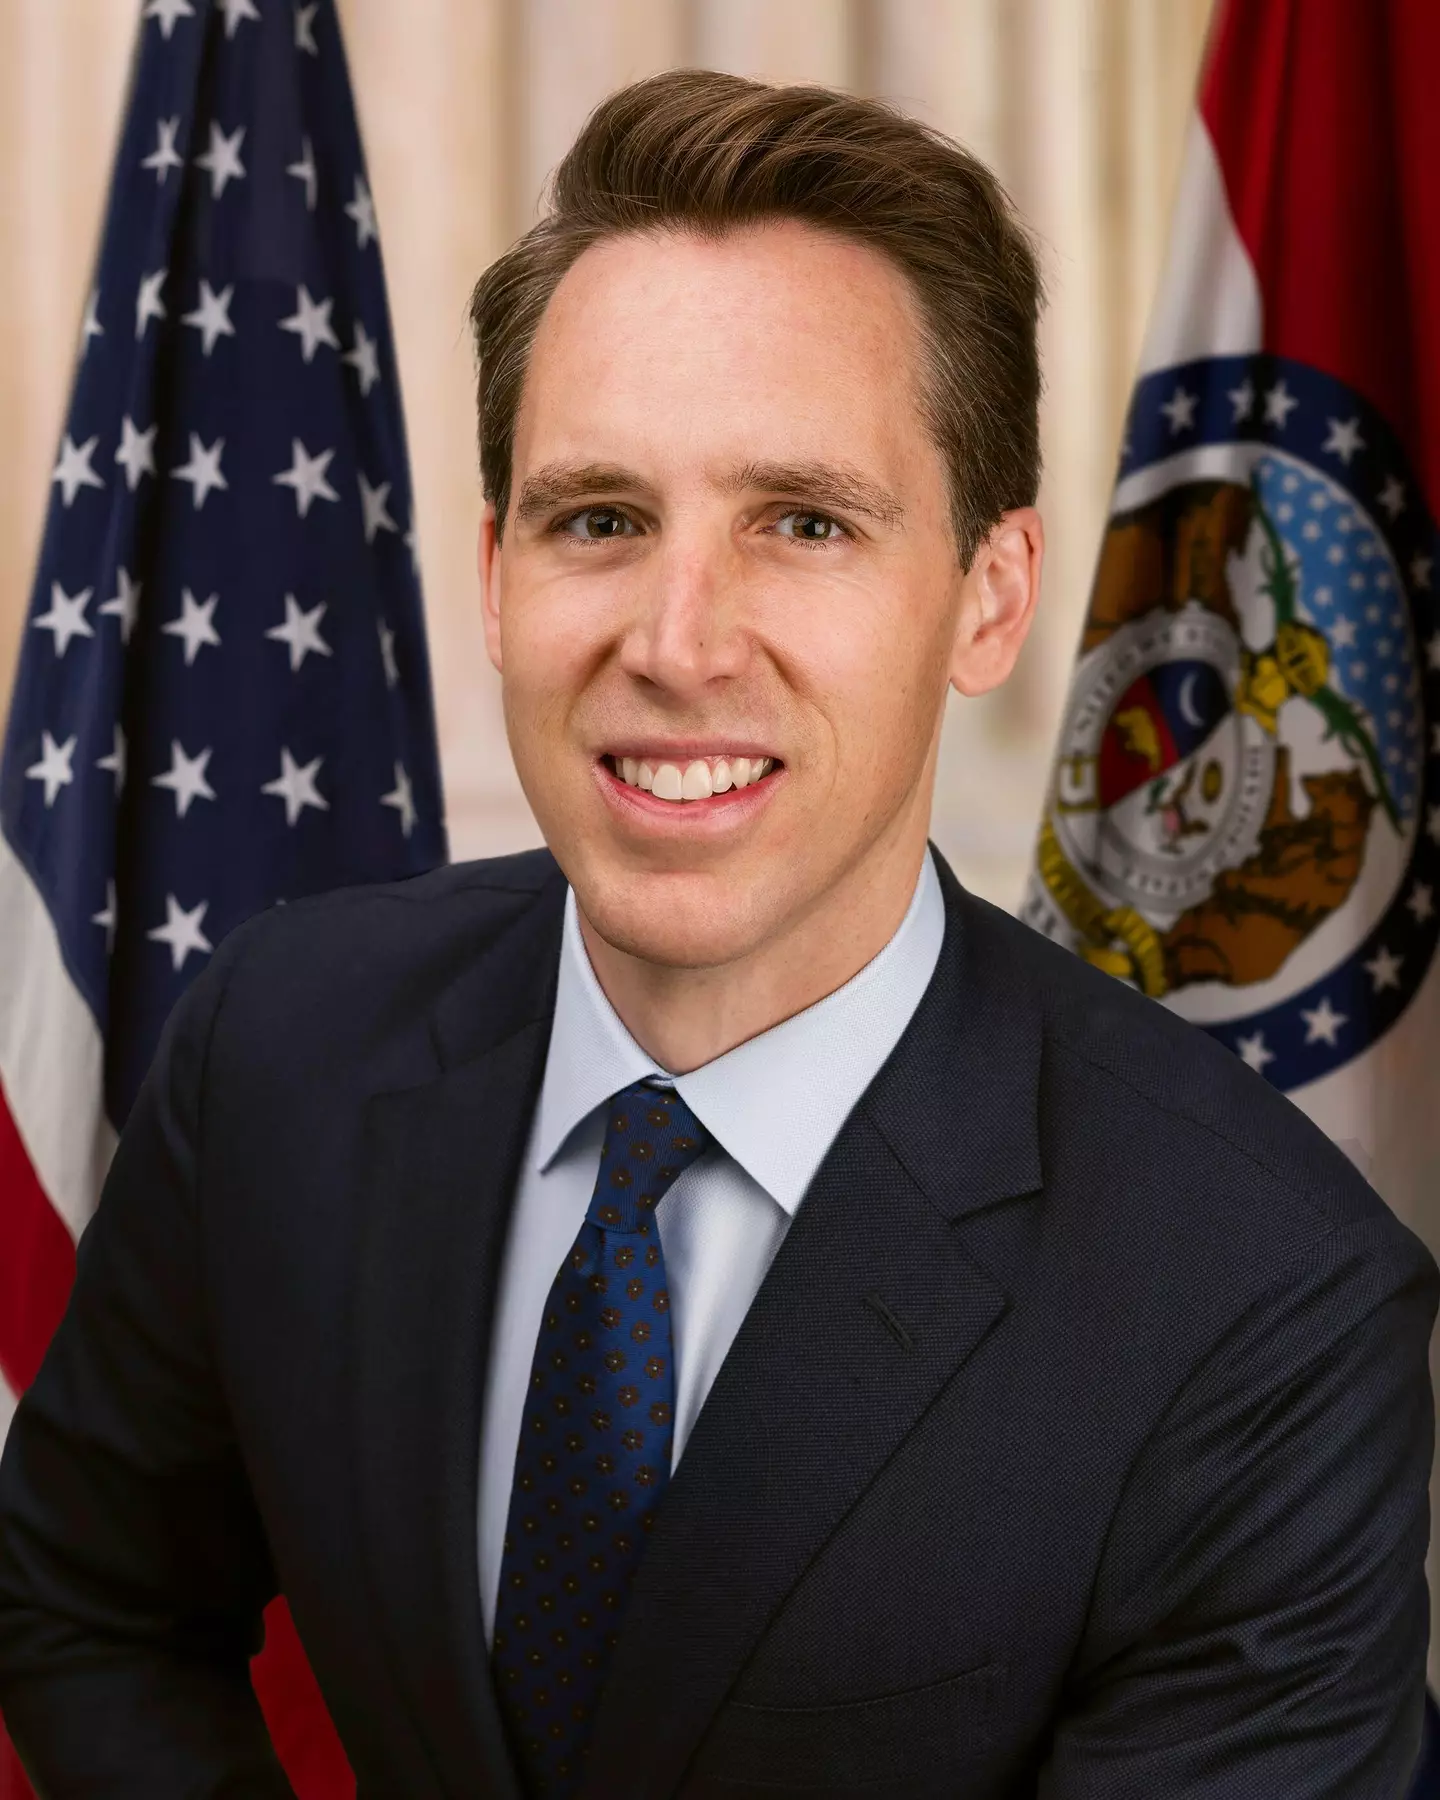 Josh Hawley has proposed a bill that would reduce copyright protections.